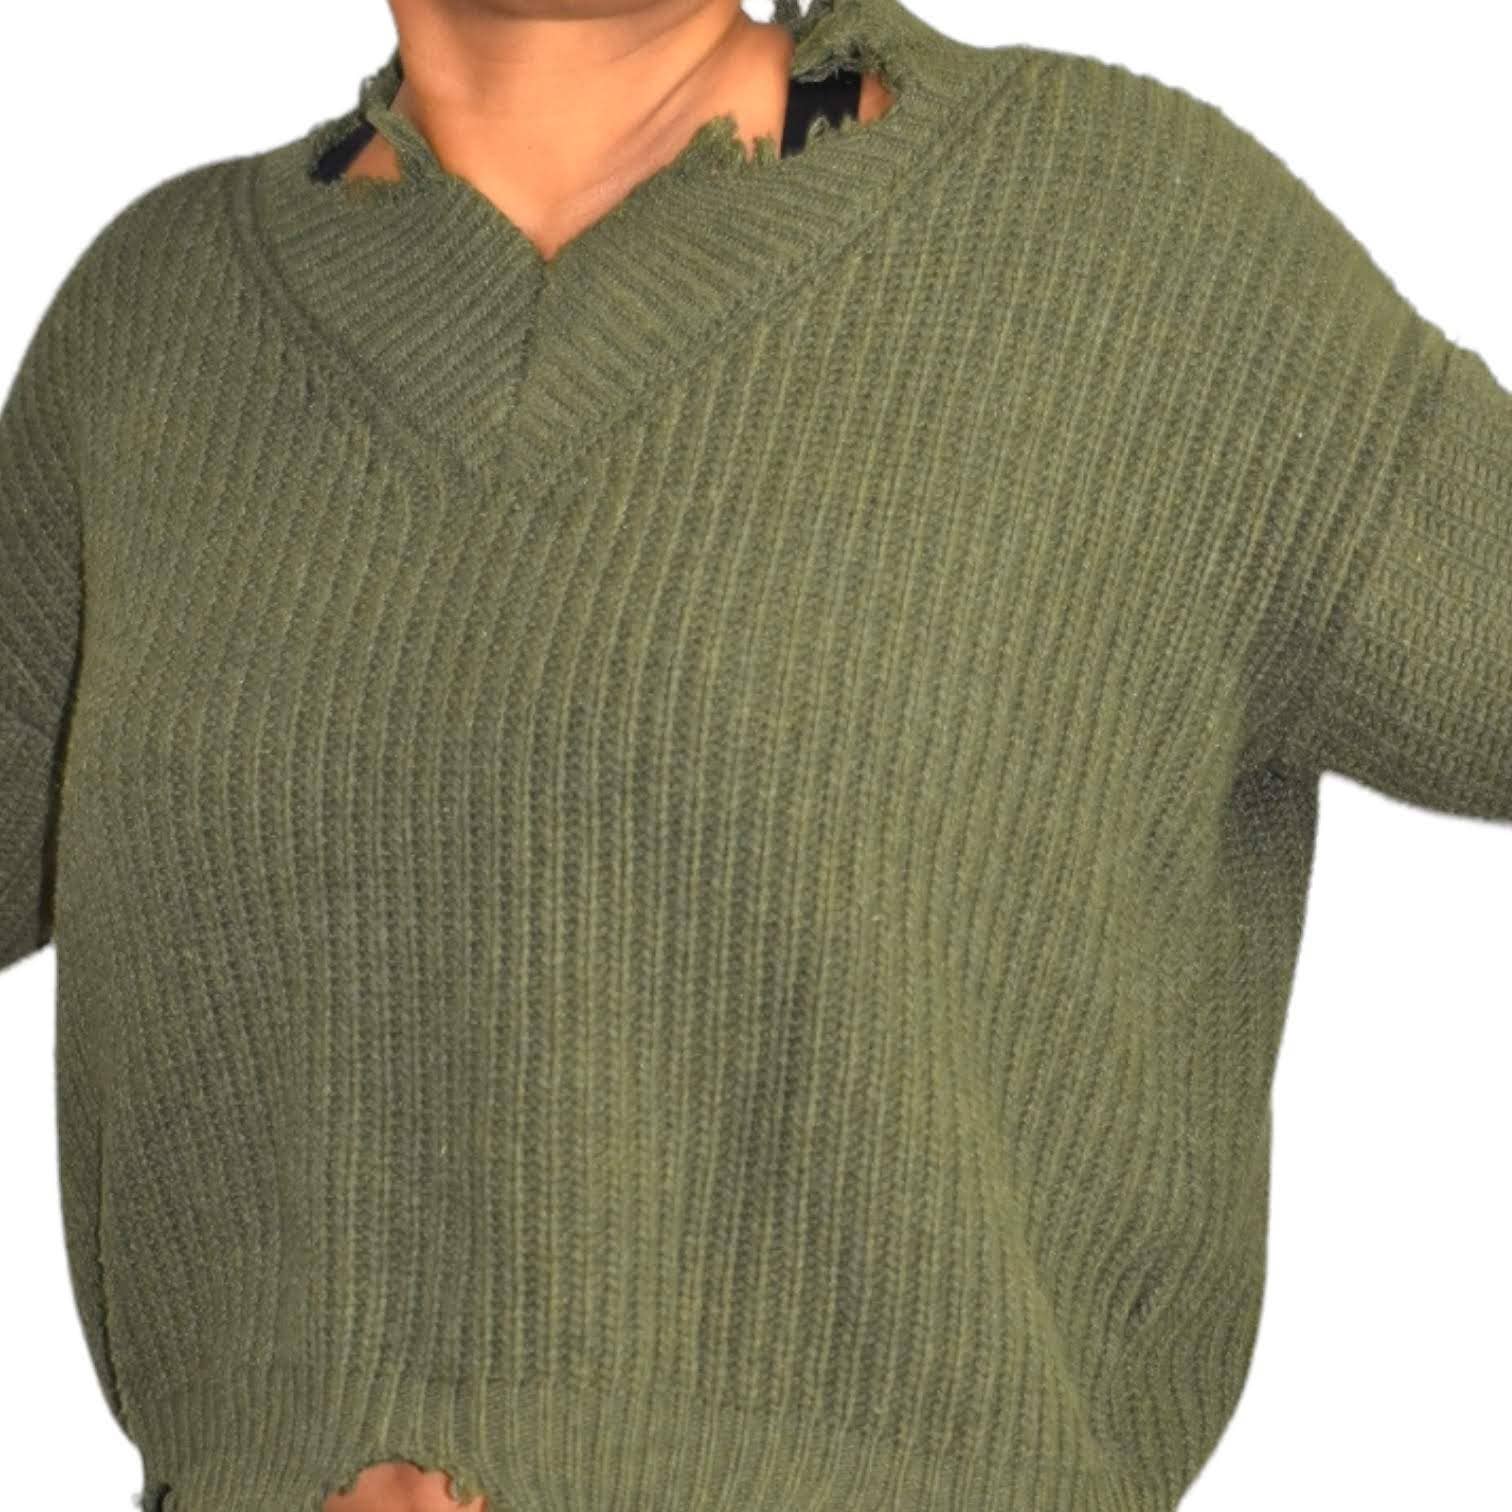 Seek the Label Distressed Sweater Olive Green Ribbed Knit Pullover Size Medium